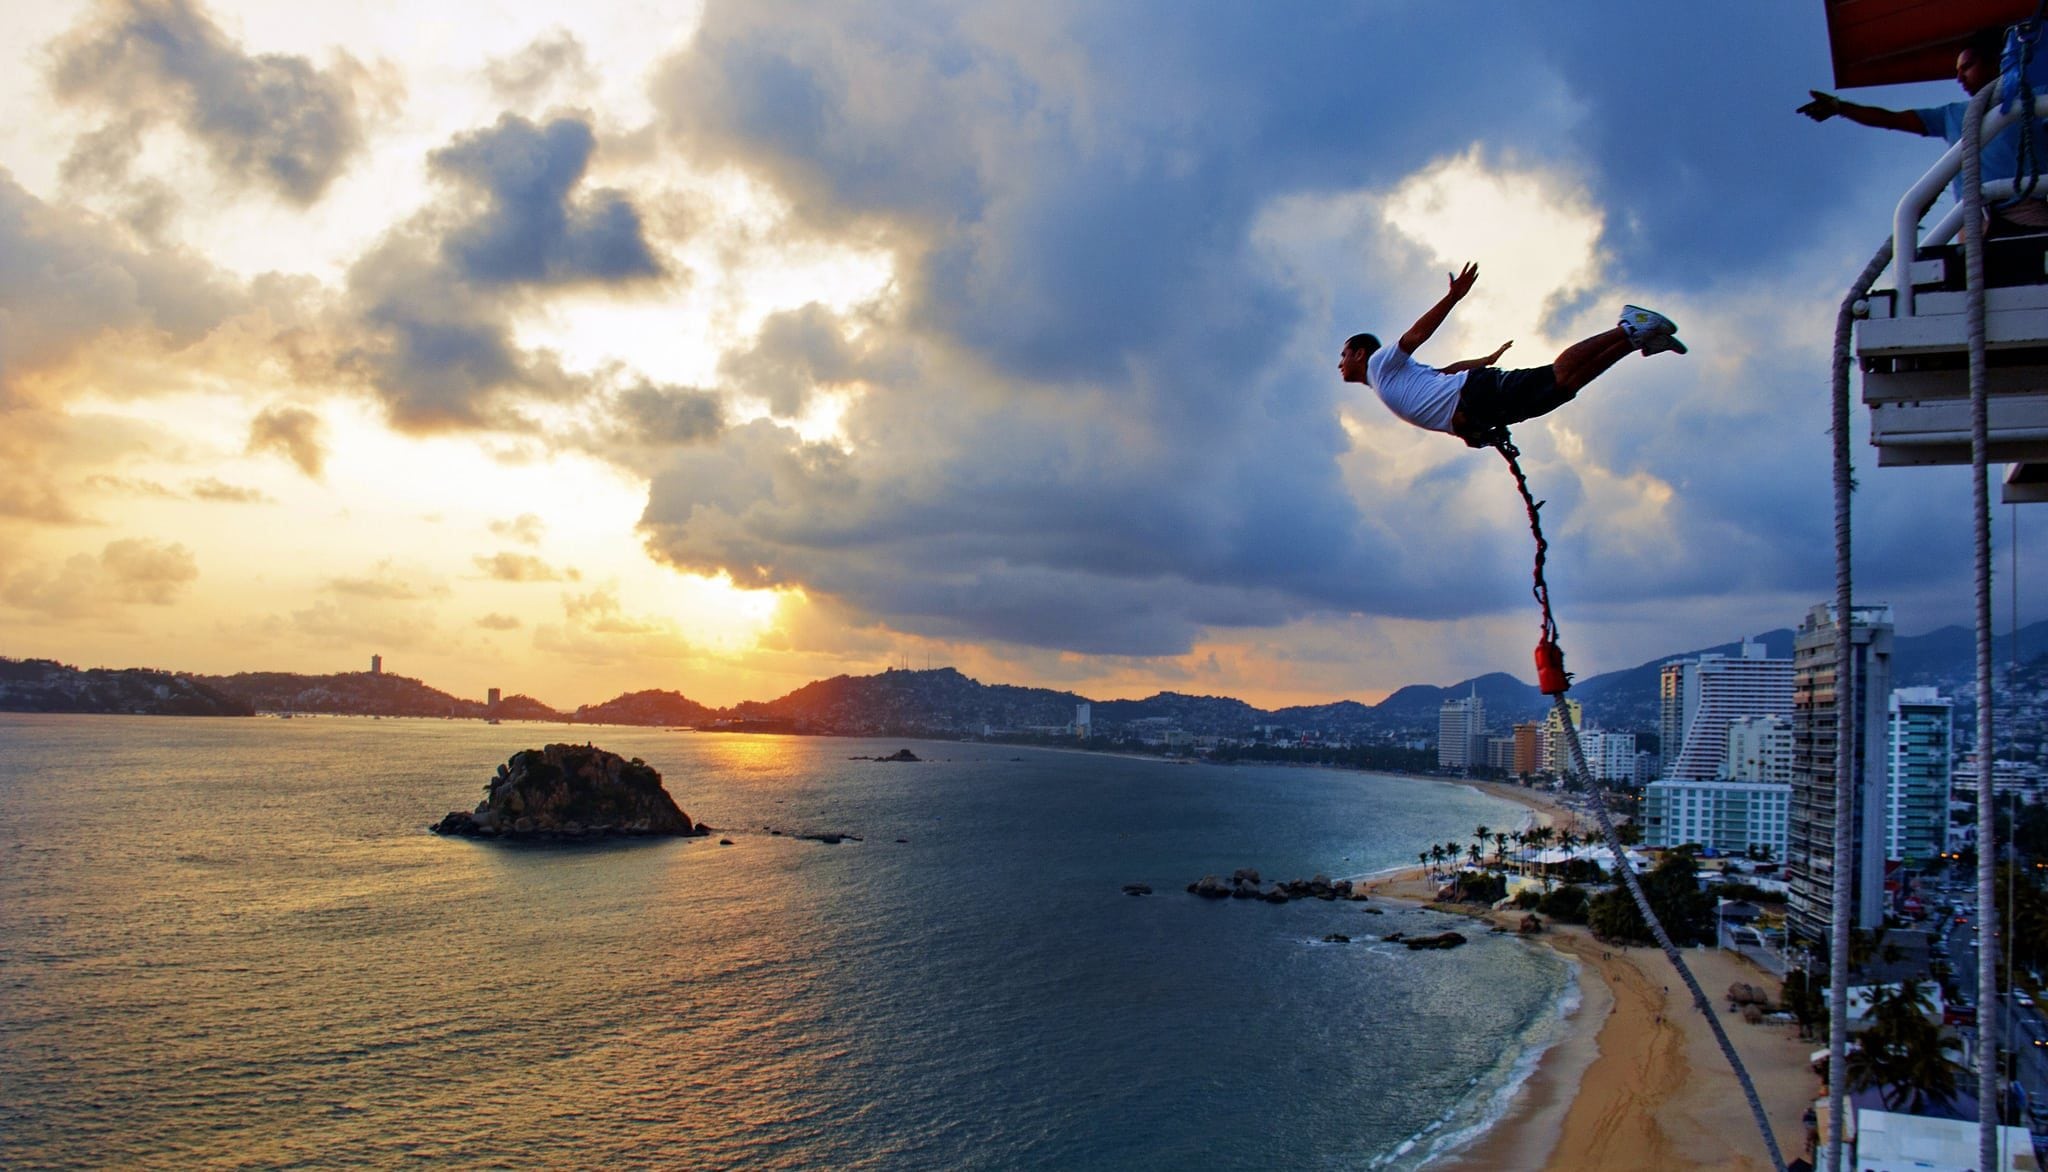 tourist-bungee-jumping-in-acapulco-on-flickr-e1536595330438.jpg